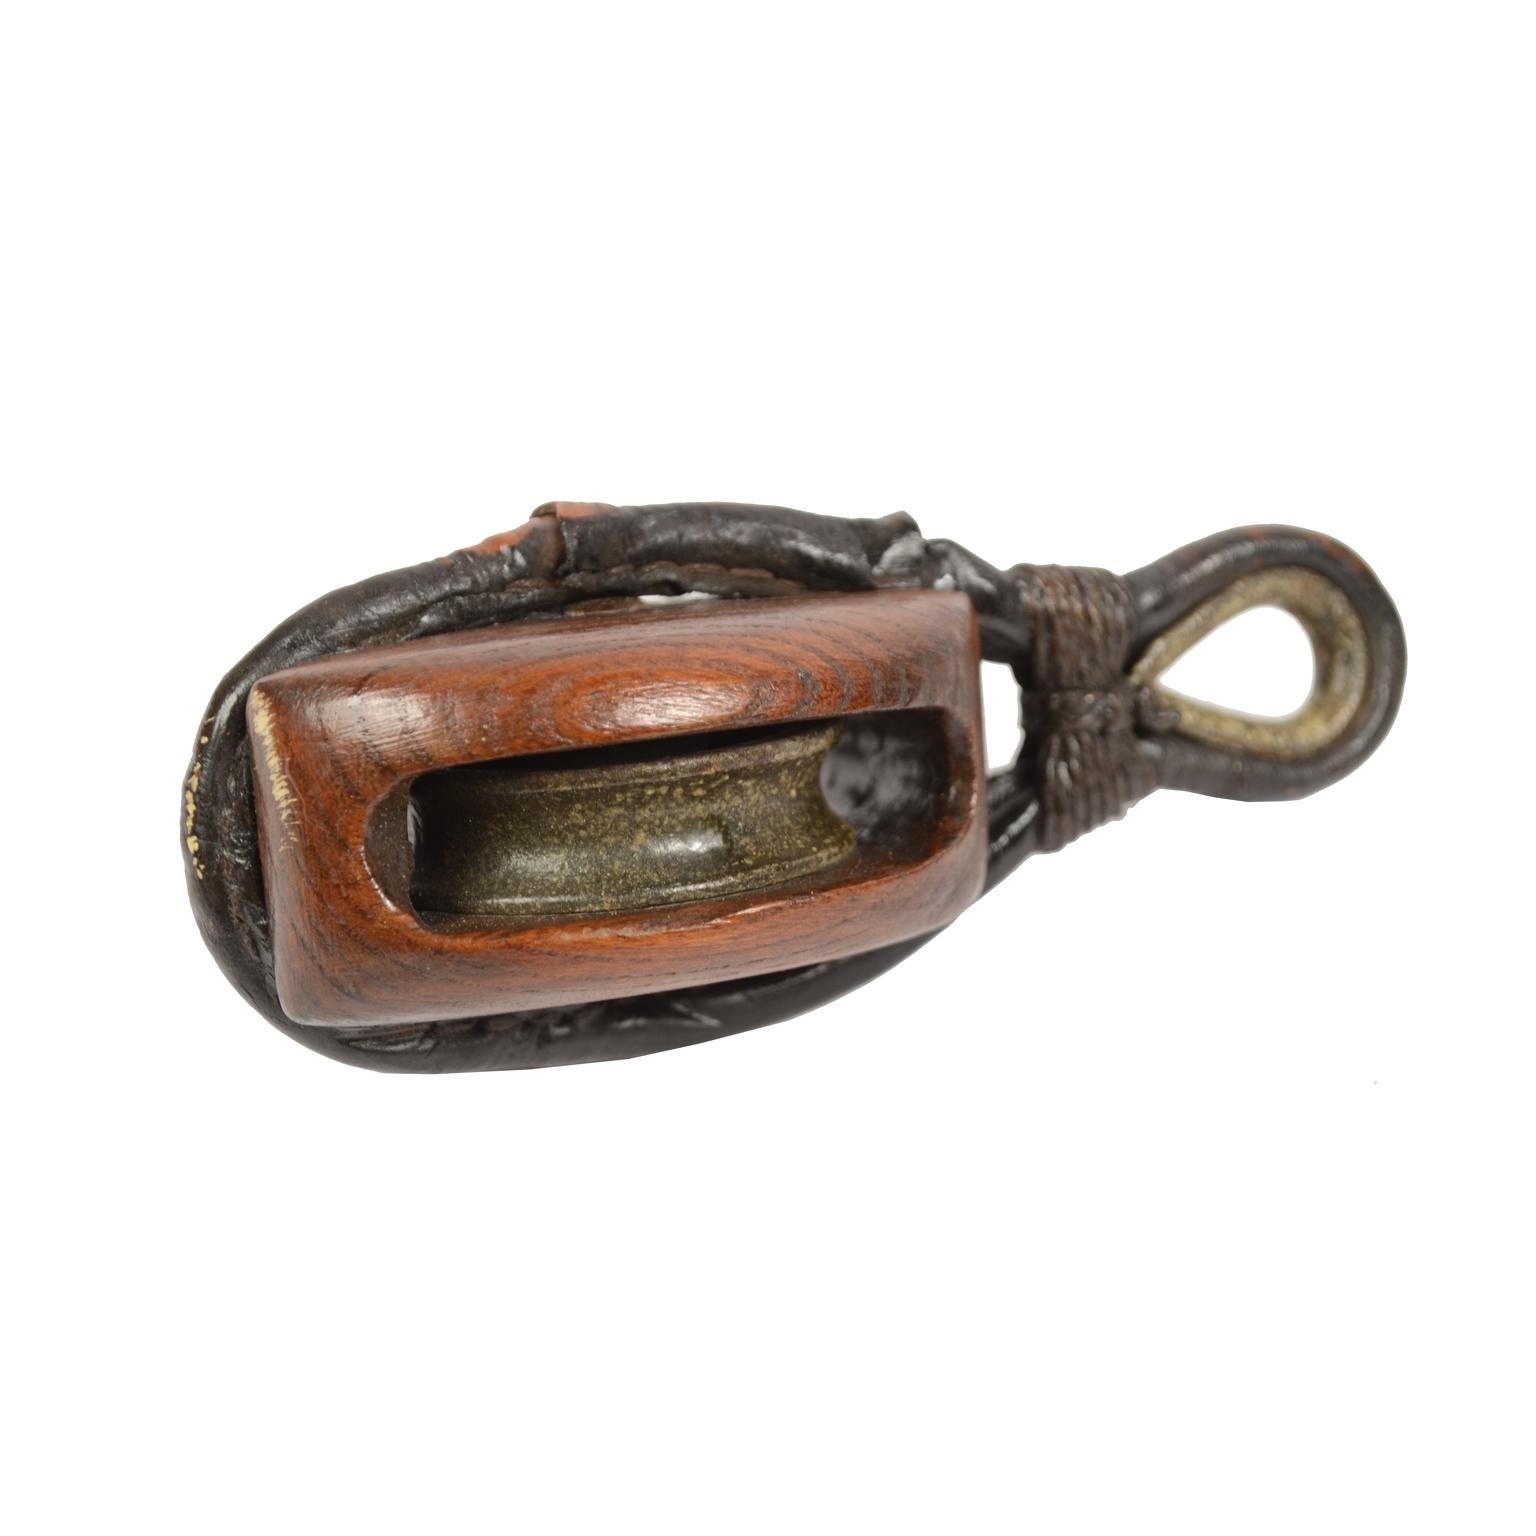 Small simple block made of wood and rope covered with leather complete with ring and pulley made of iron. English manufacture of the second half of the 19th century. 6.5x7x17 cm. Very good condition.
Shipping insured by Lloyd's London; it is